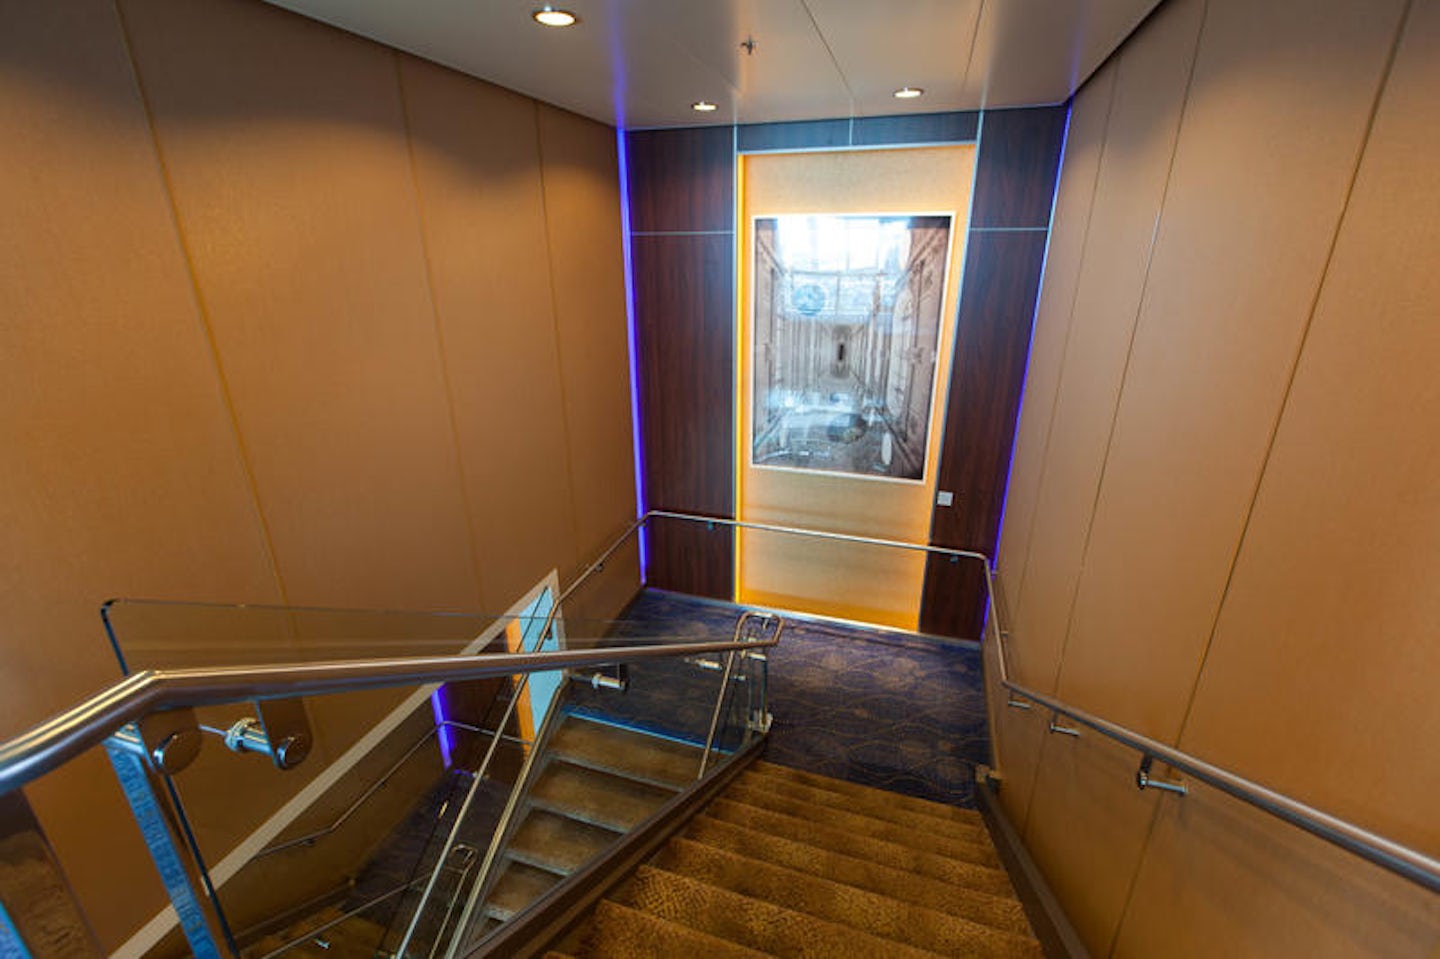 Stairs on Celebrity Equinox